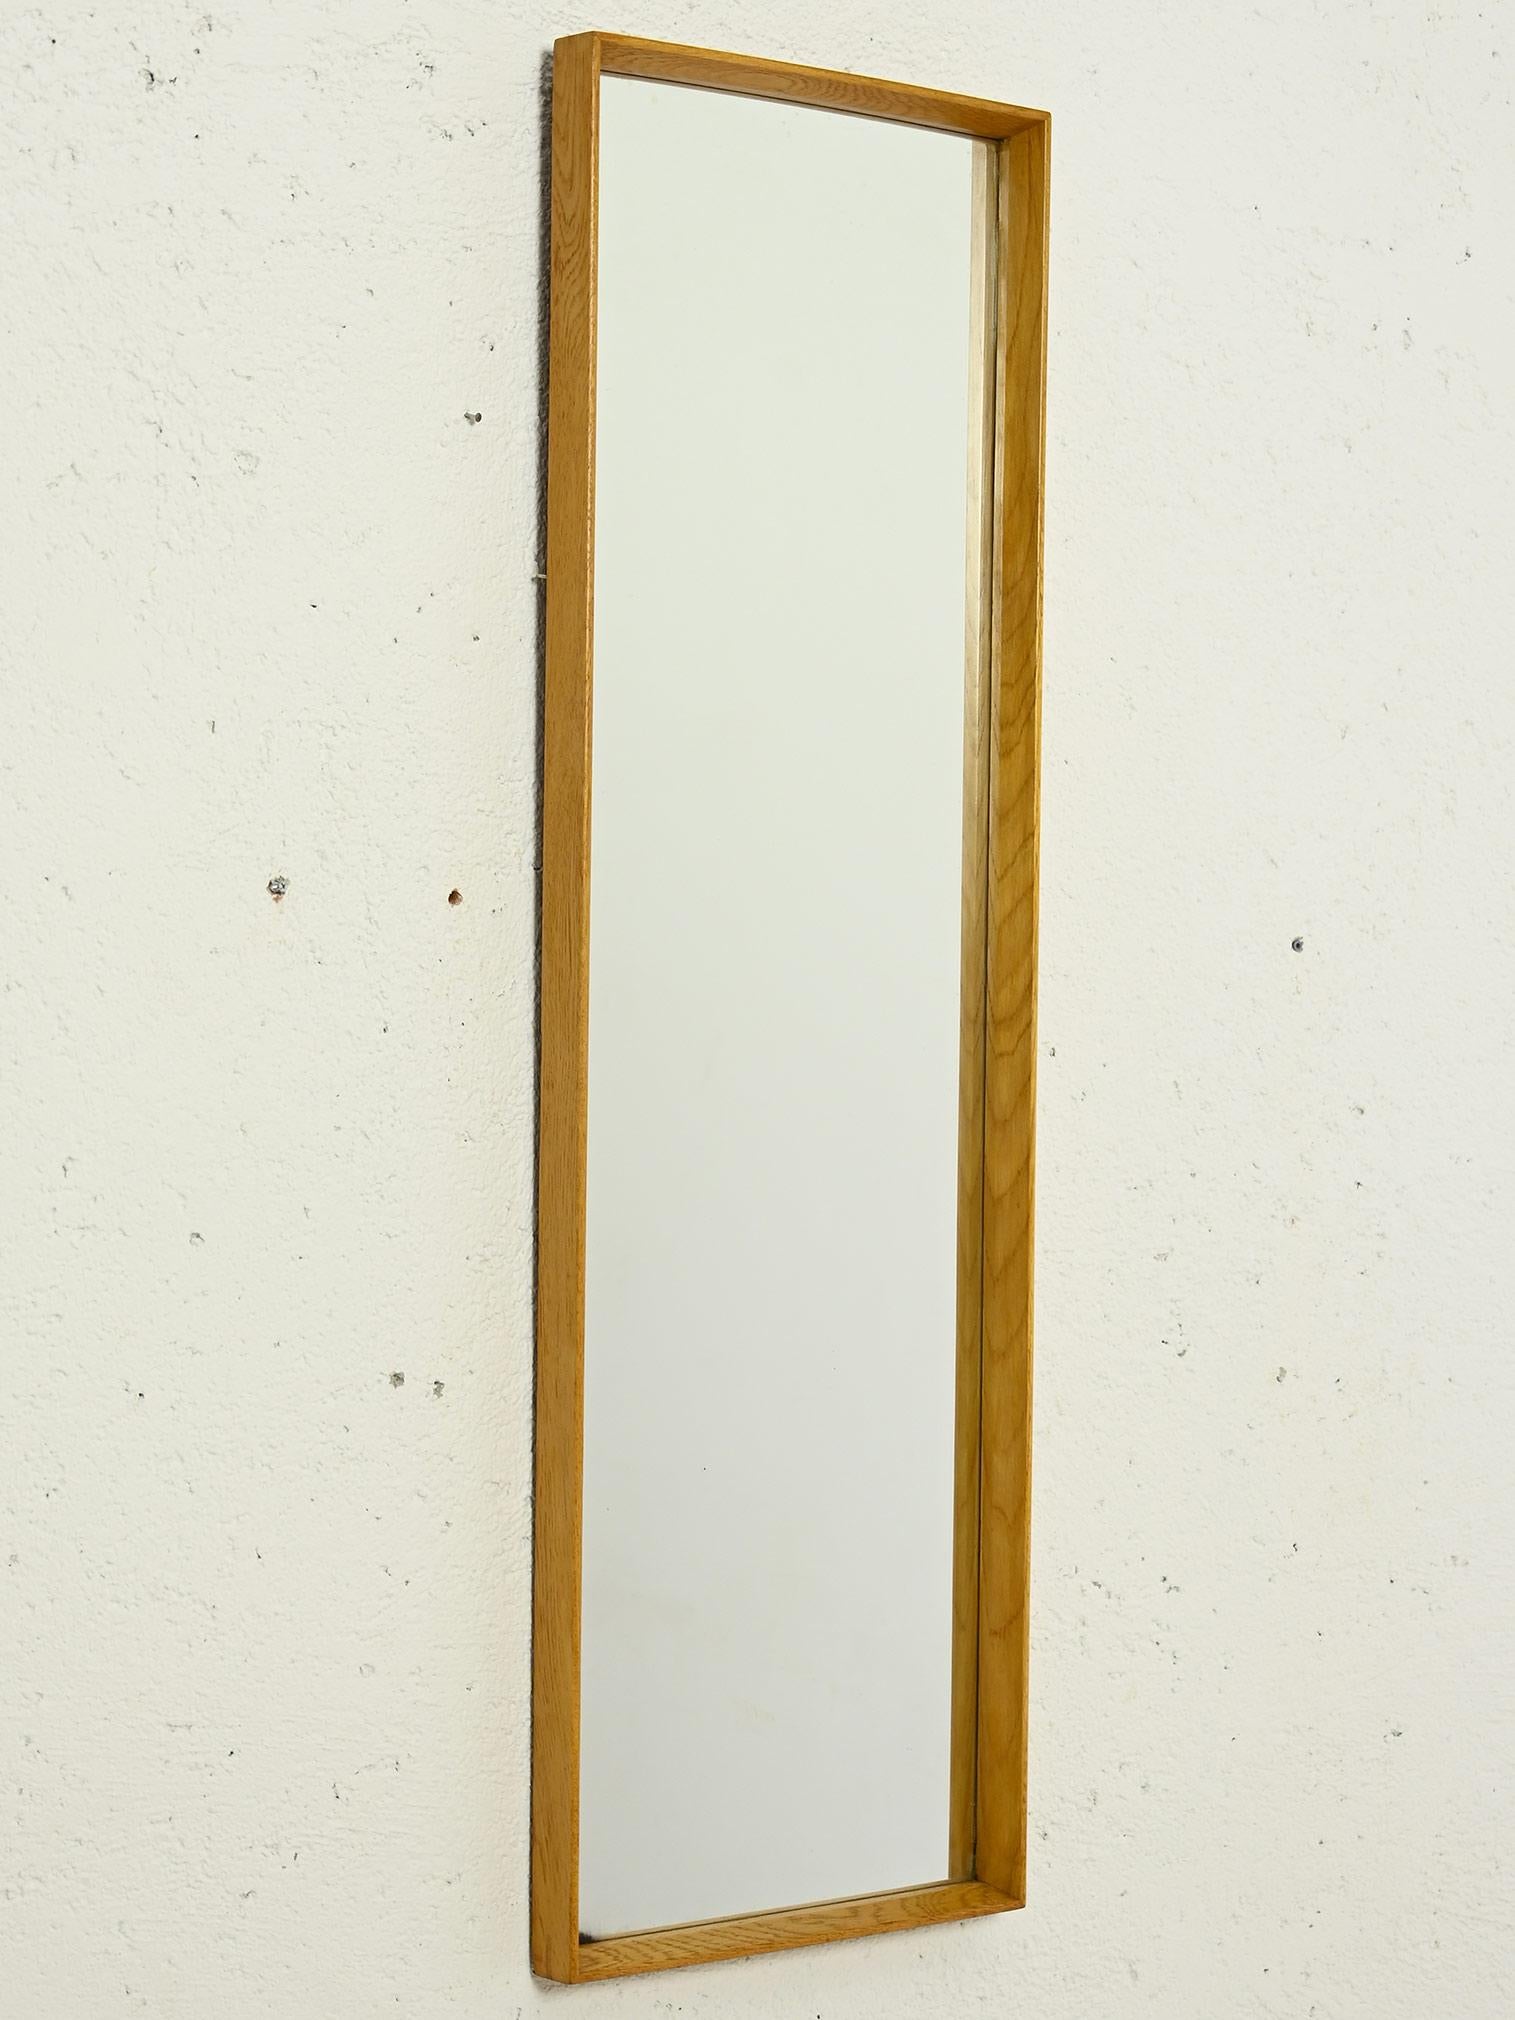 Original 1960s vintage Scandinavian mirror.

A clean, linear Nordic design mirror made of oak wood.
The rectangular shape makes it ideal as a wall mirror, adapting to any room. The thin edges and slightly raised frame add a touch of sophistication,